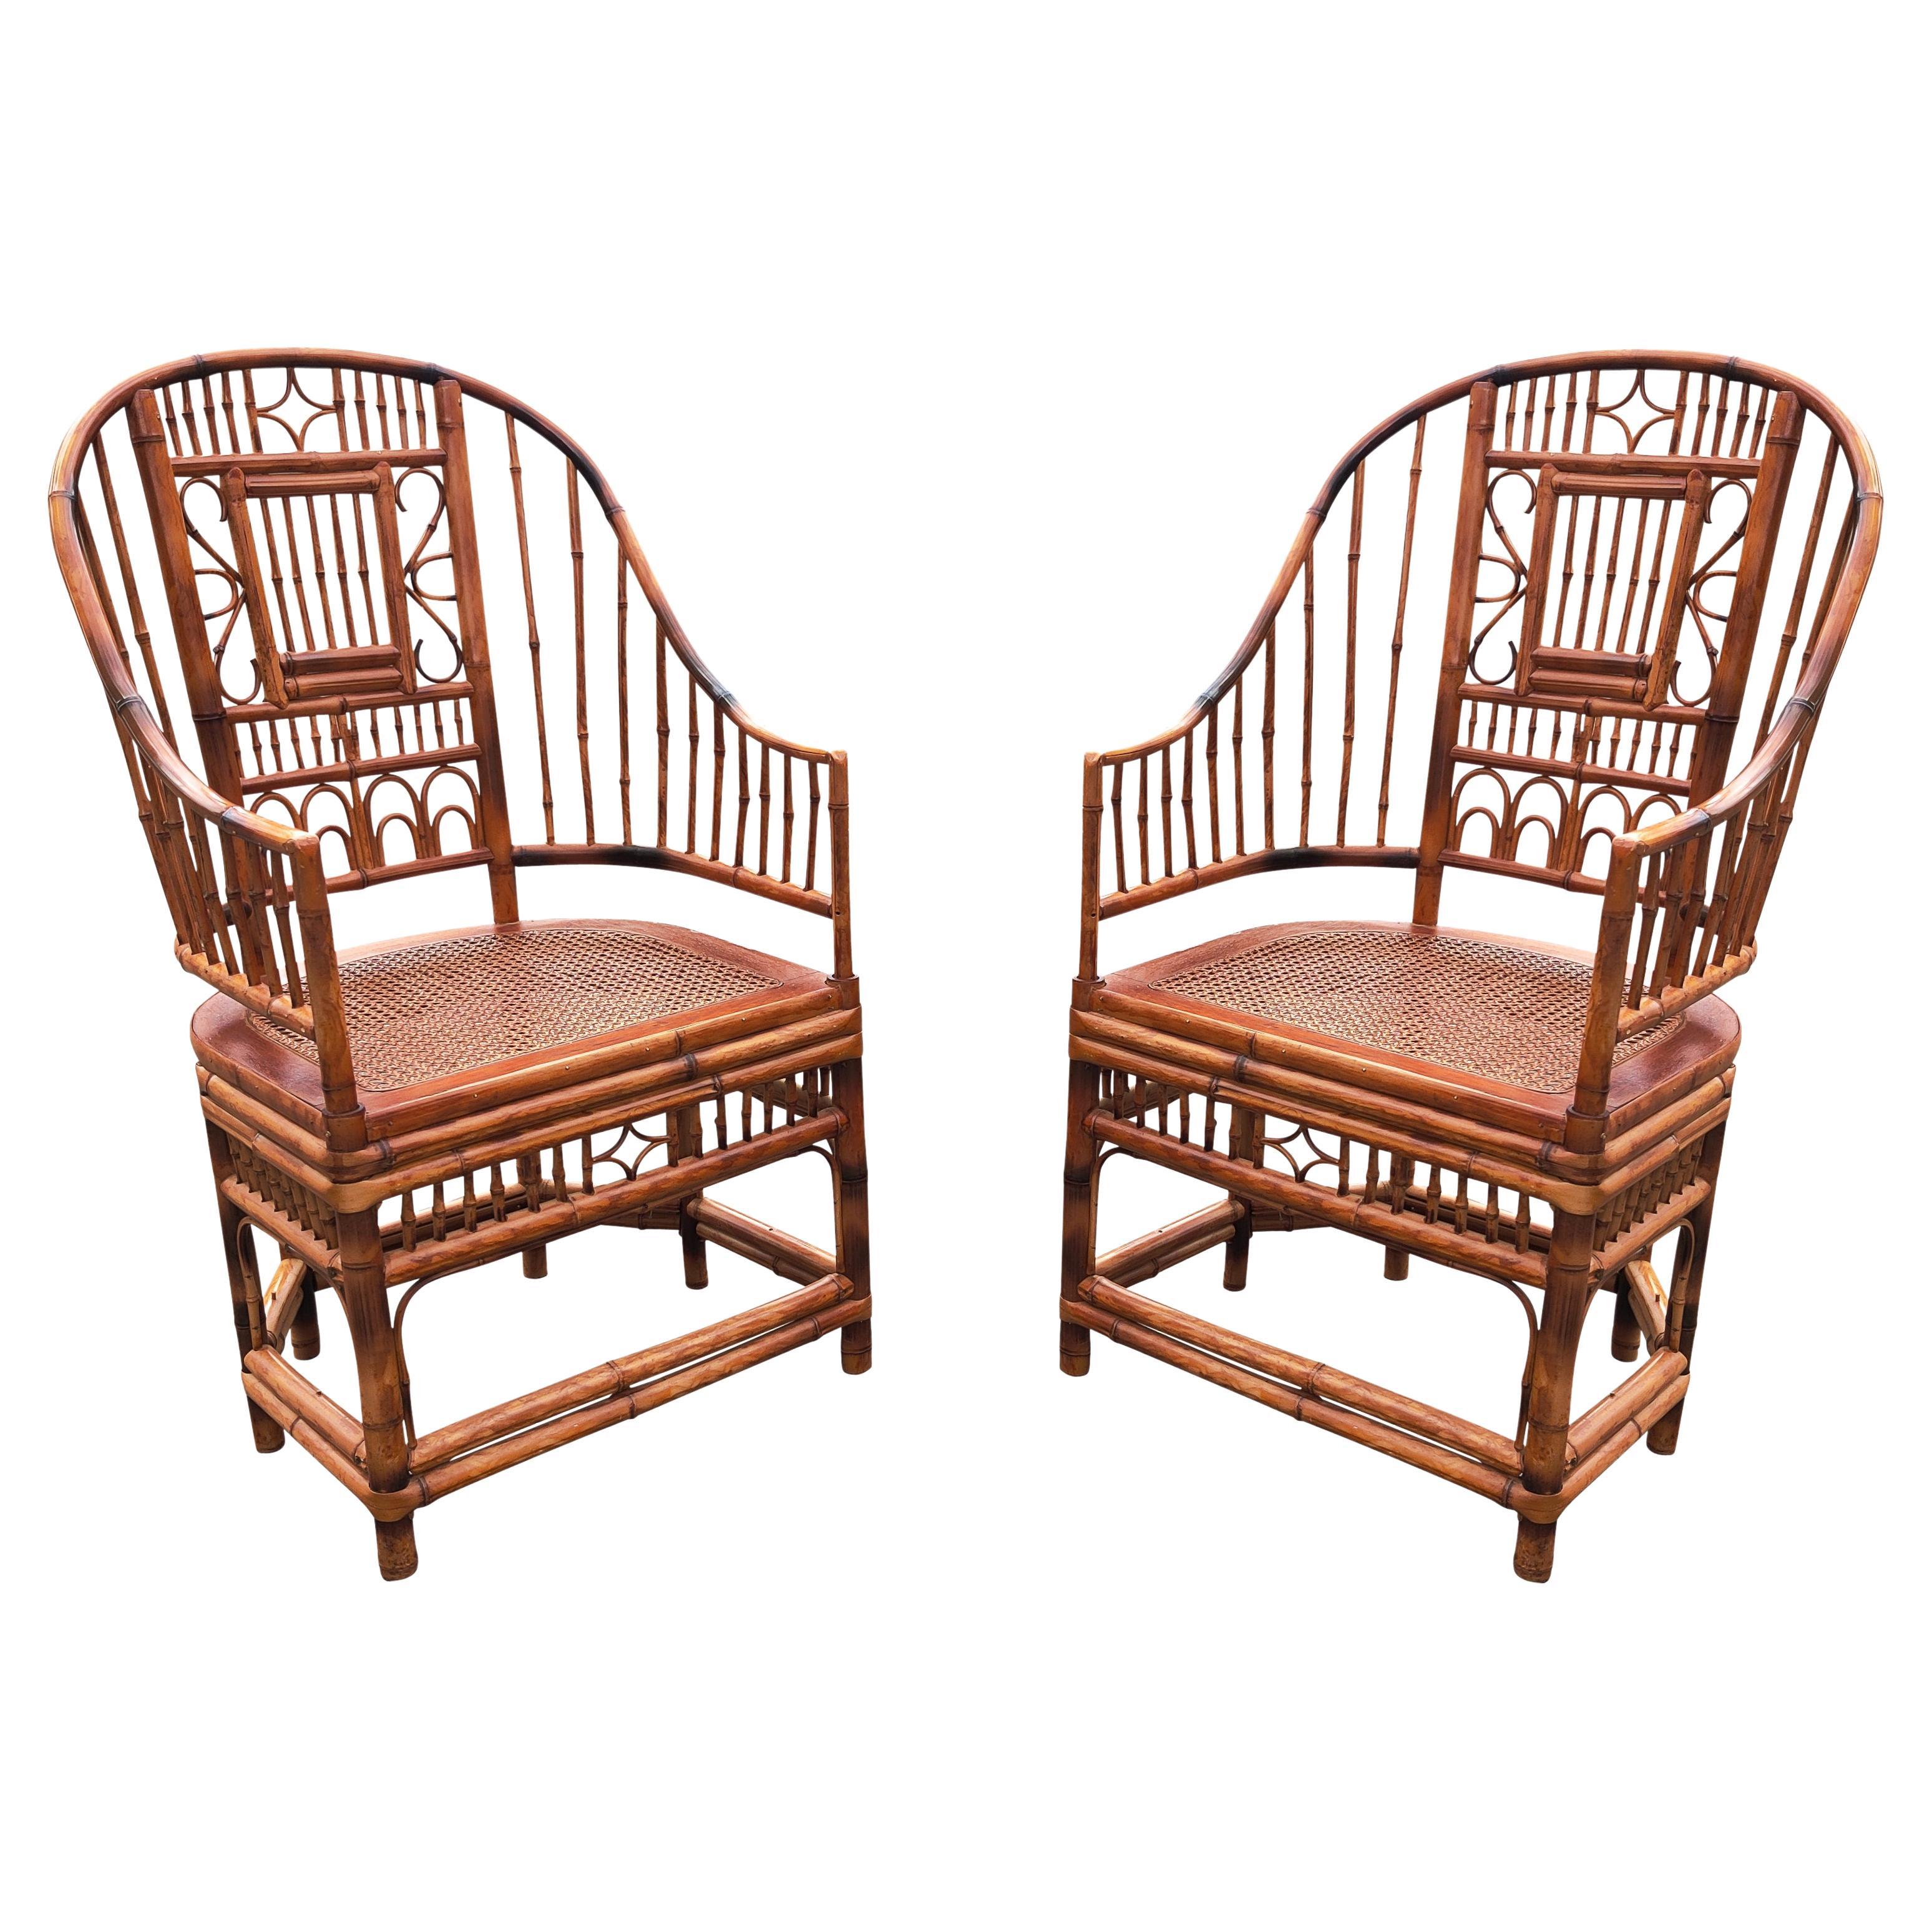 Chinoiserie English Bamboo Cane Pair Armchairs, Manner of Brighton Pavilion